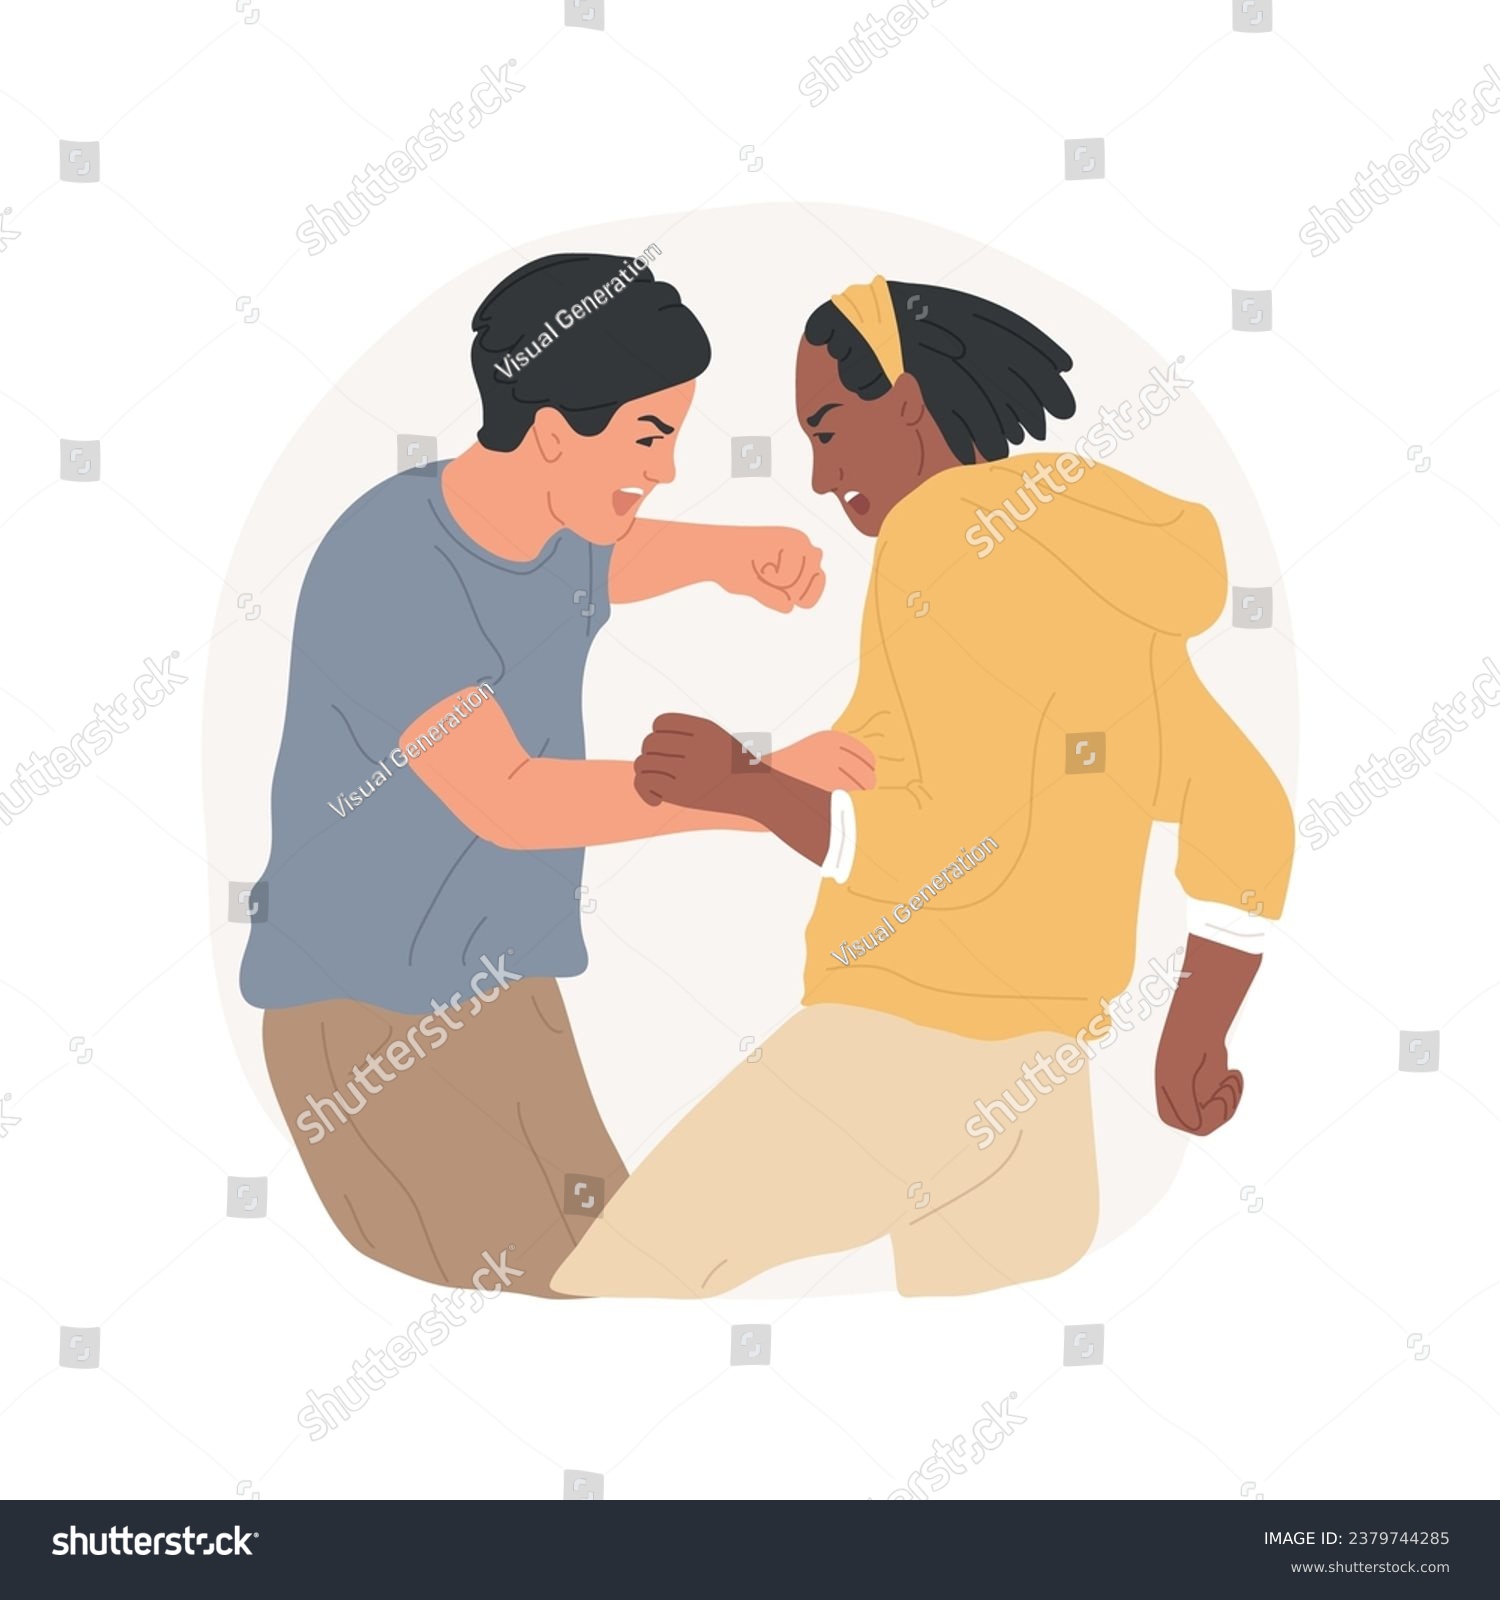 SVG of Fighting isolated cartoon vector illustration. Angry boys fighting and swearing, teenagers bad habits, self-defense against school bullies, street violence, guys conflict vector cartoon. svg